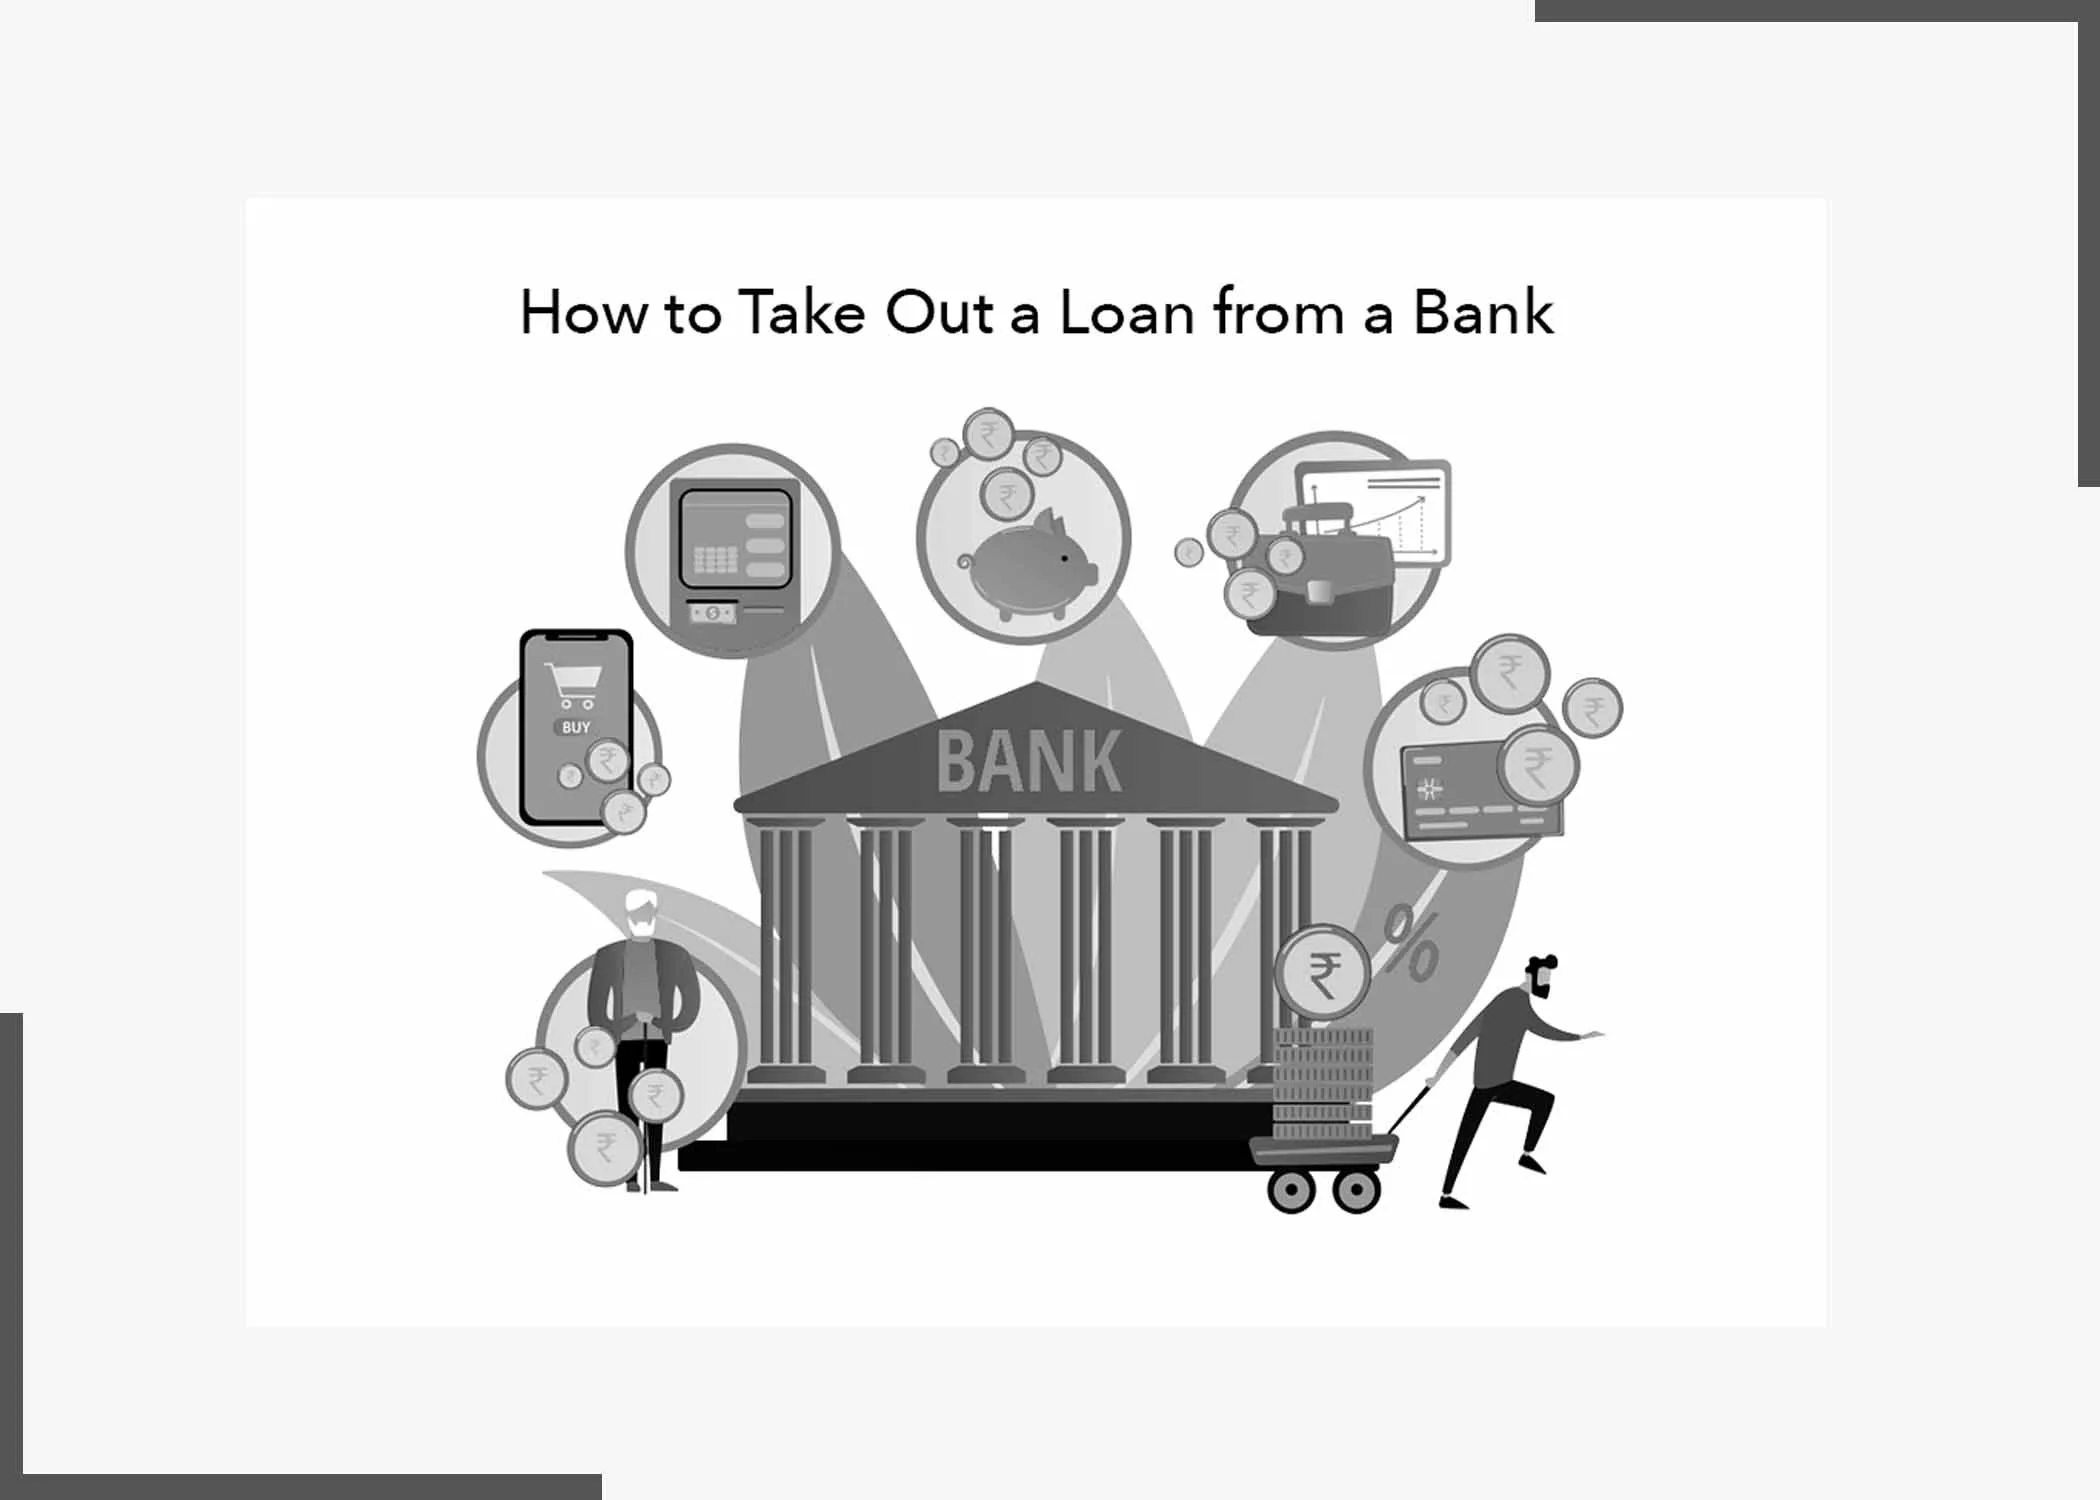 How to Take Out a Loan from a Bank